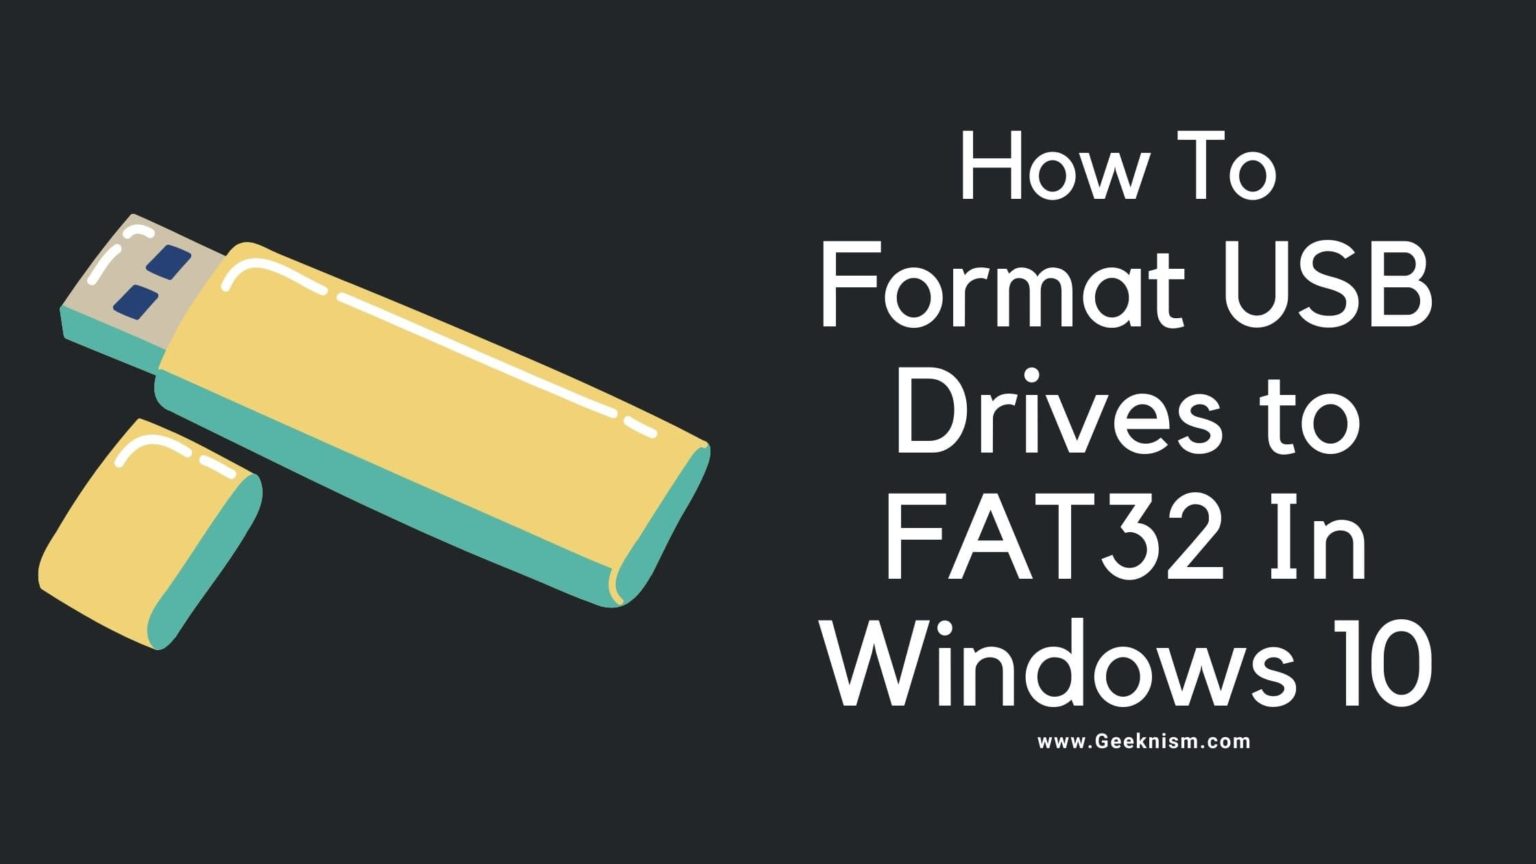 how to format usb drives larger than 32gb with fat32 on windows 10